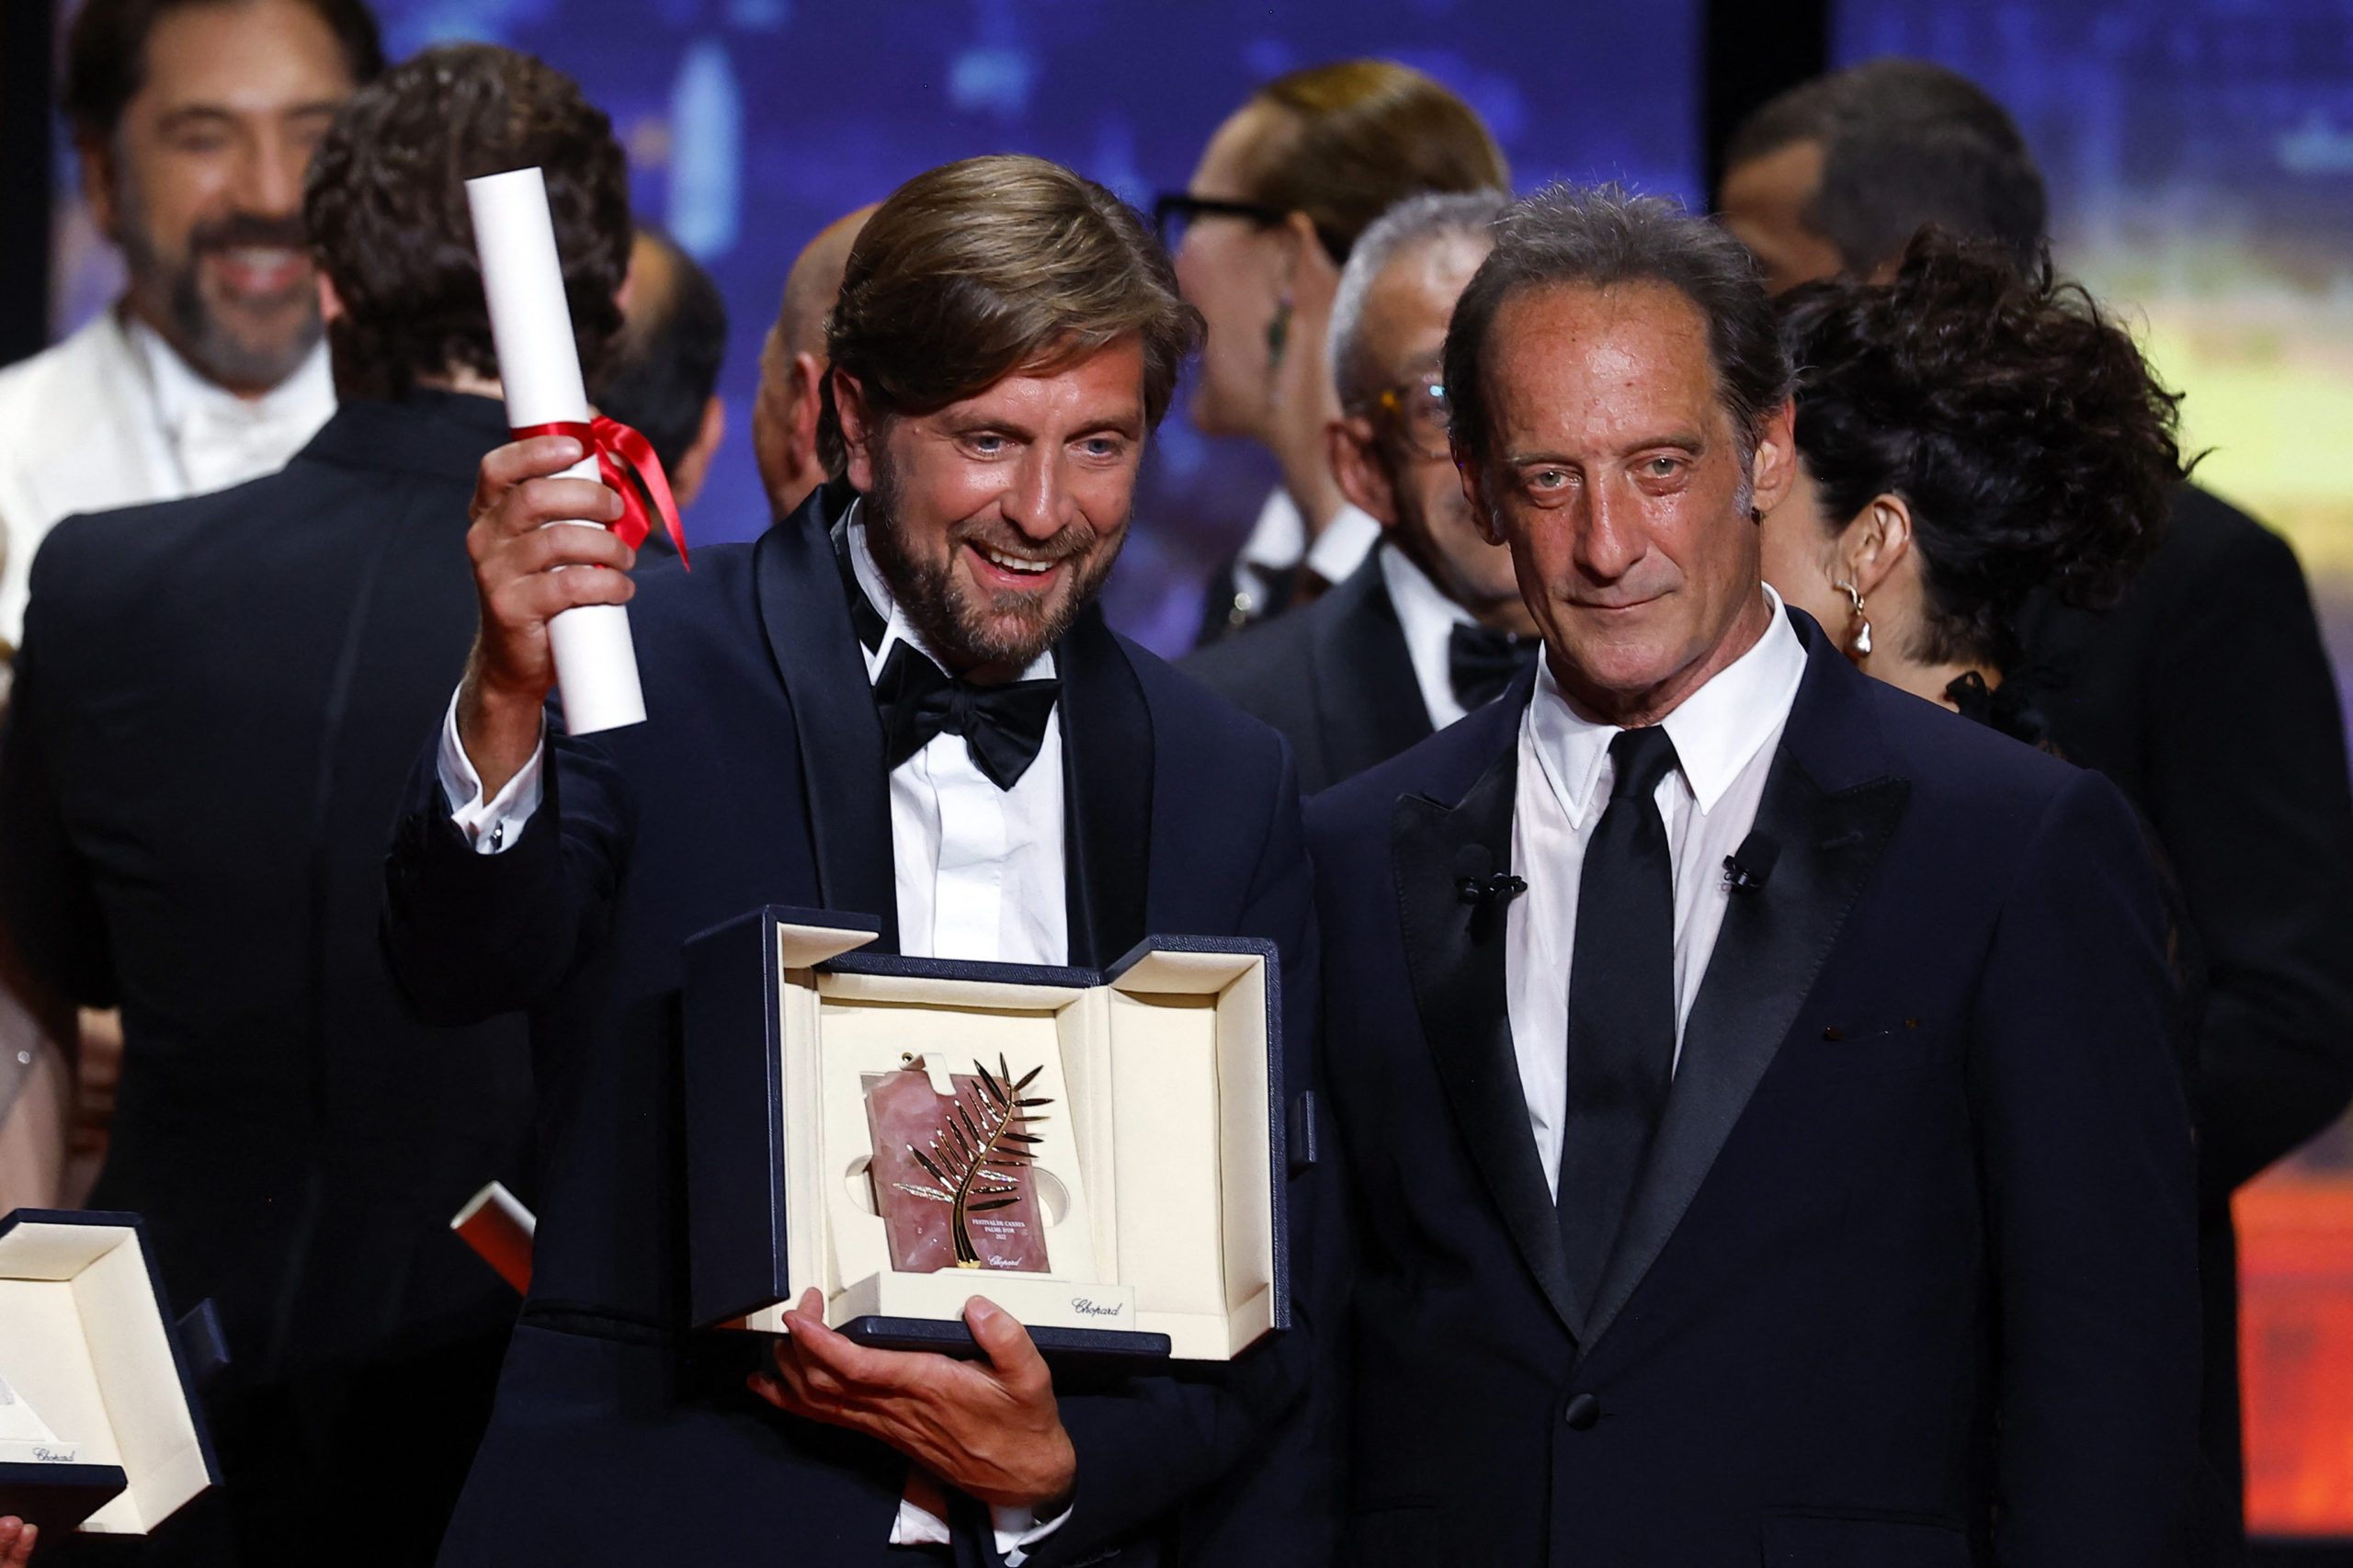 The 75th Cannes Film Festival - Closing ceremony - Cannes, France, May 28, 2022. Director Ruben Ostlund, Palme d'Or award winner for the film film "Triangle of Sadness", poses next to Vincent Lindon, Jury President of the 75th Cannes Film Festival.